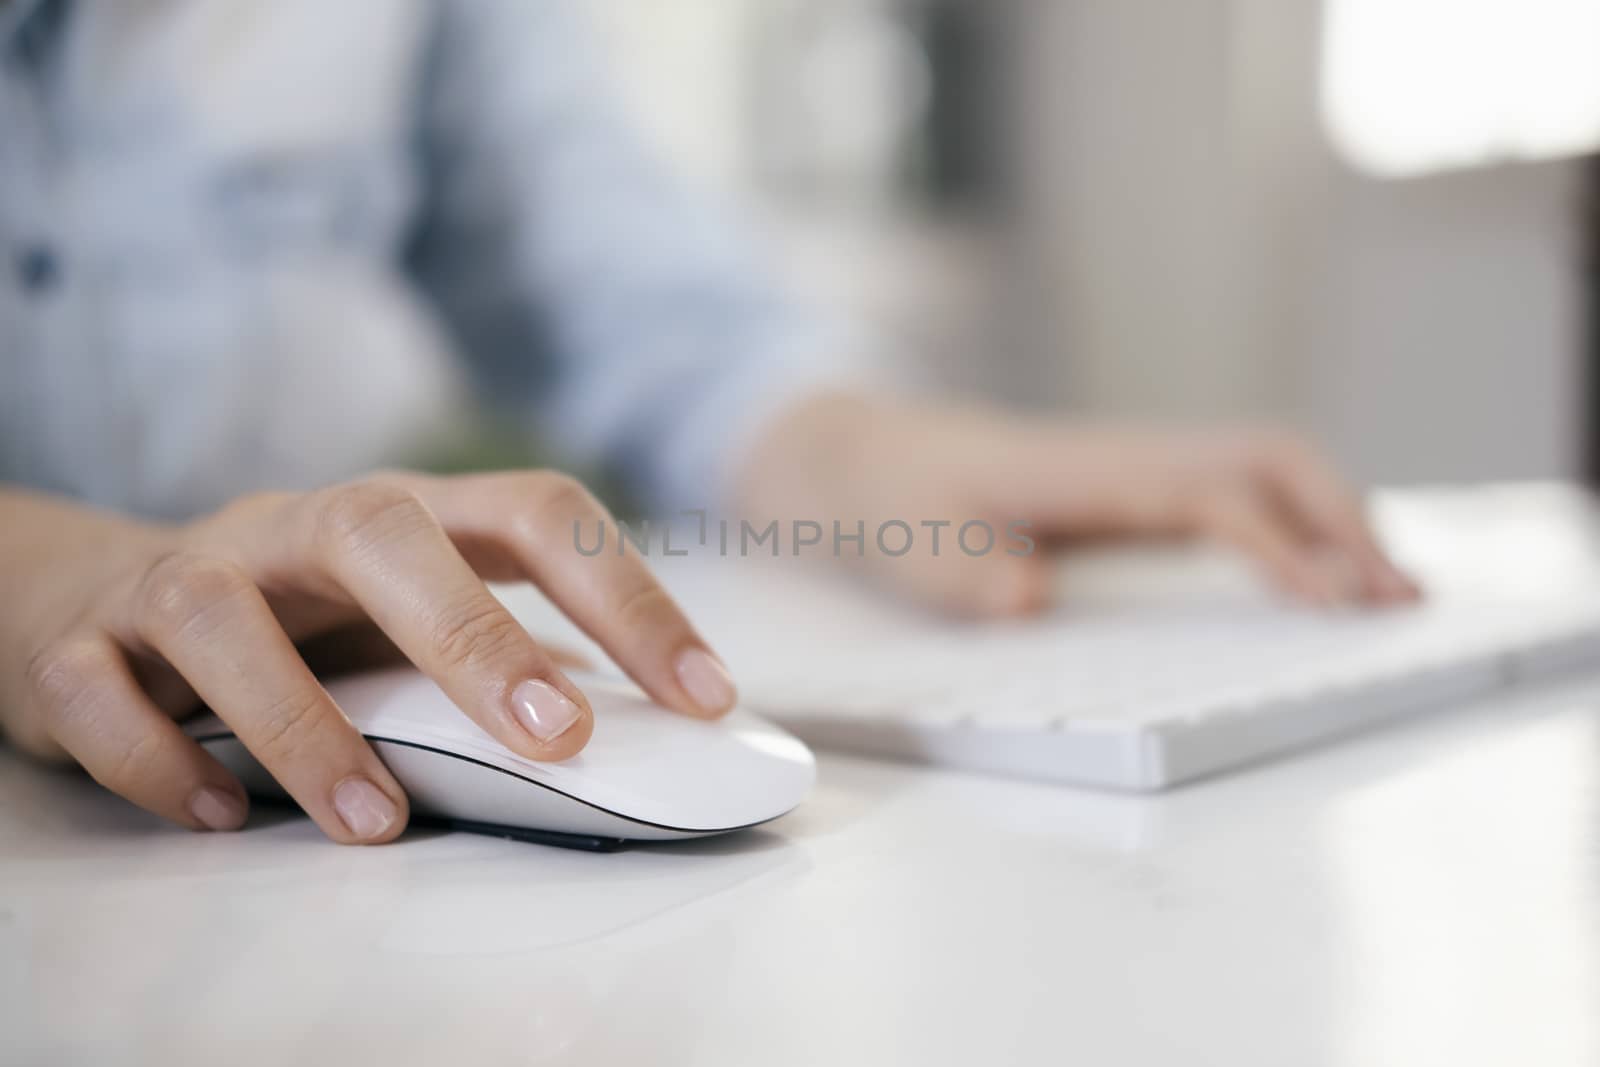 Closeup woman using computer mouse with computer keyboard by ijeab